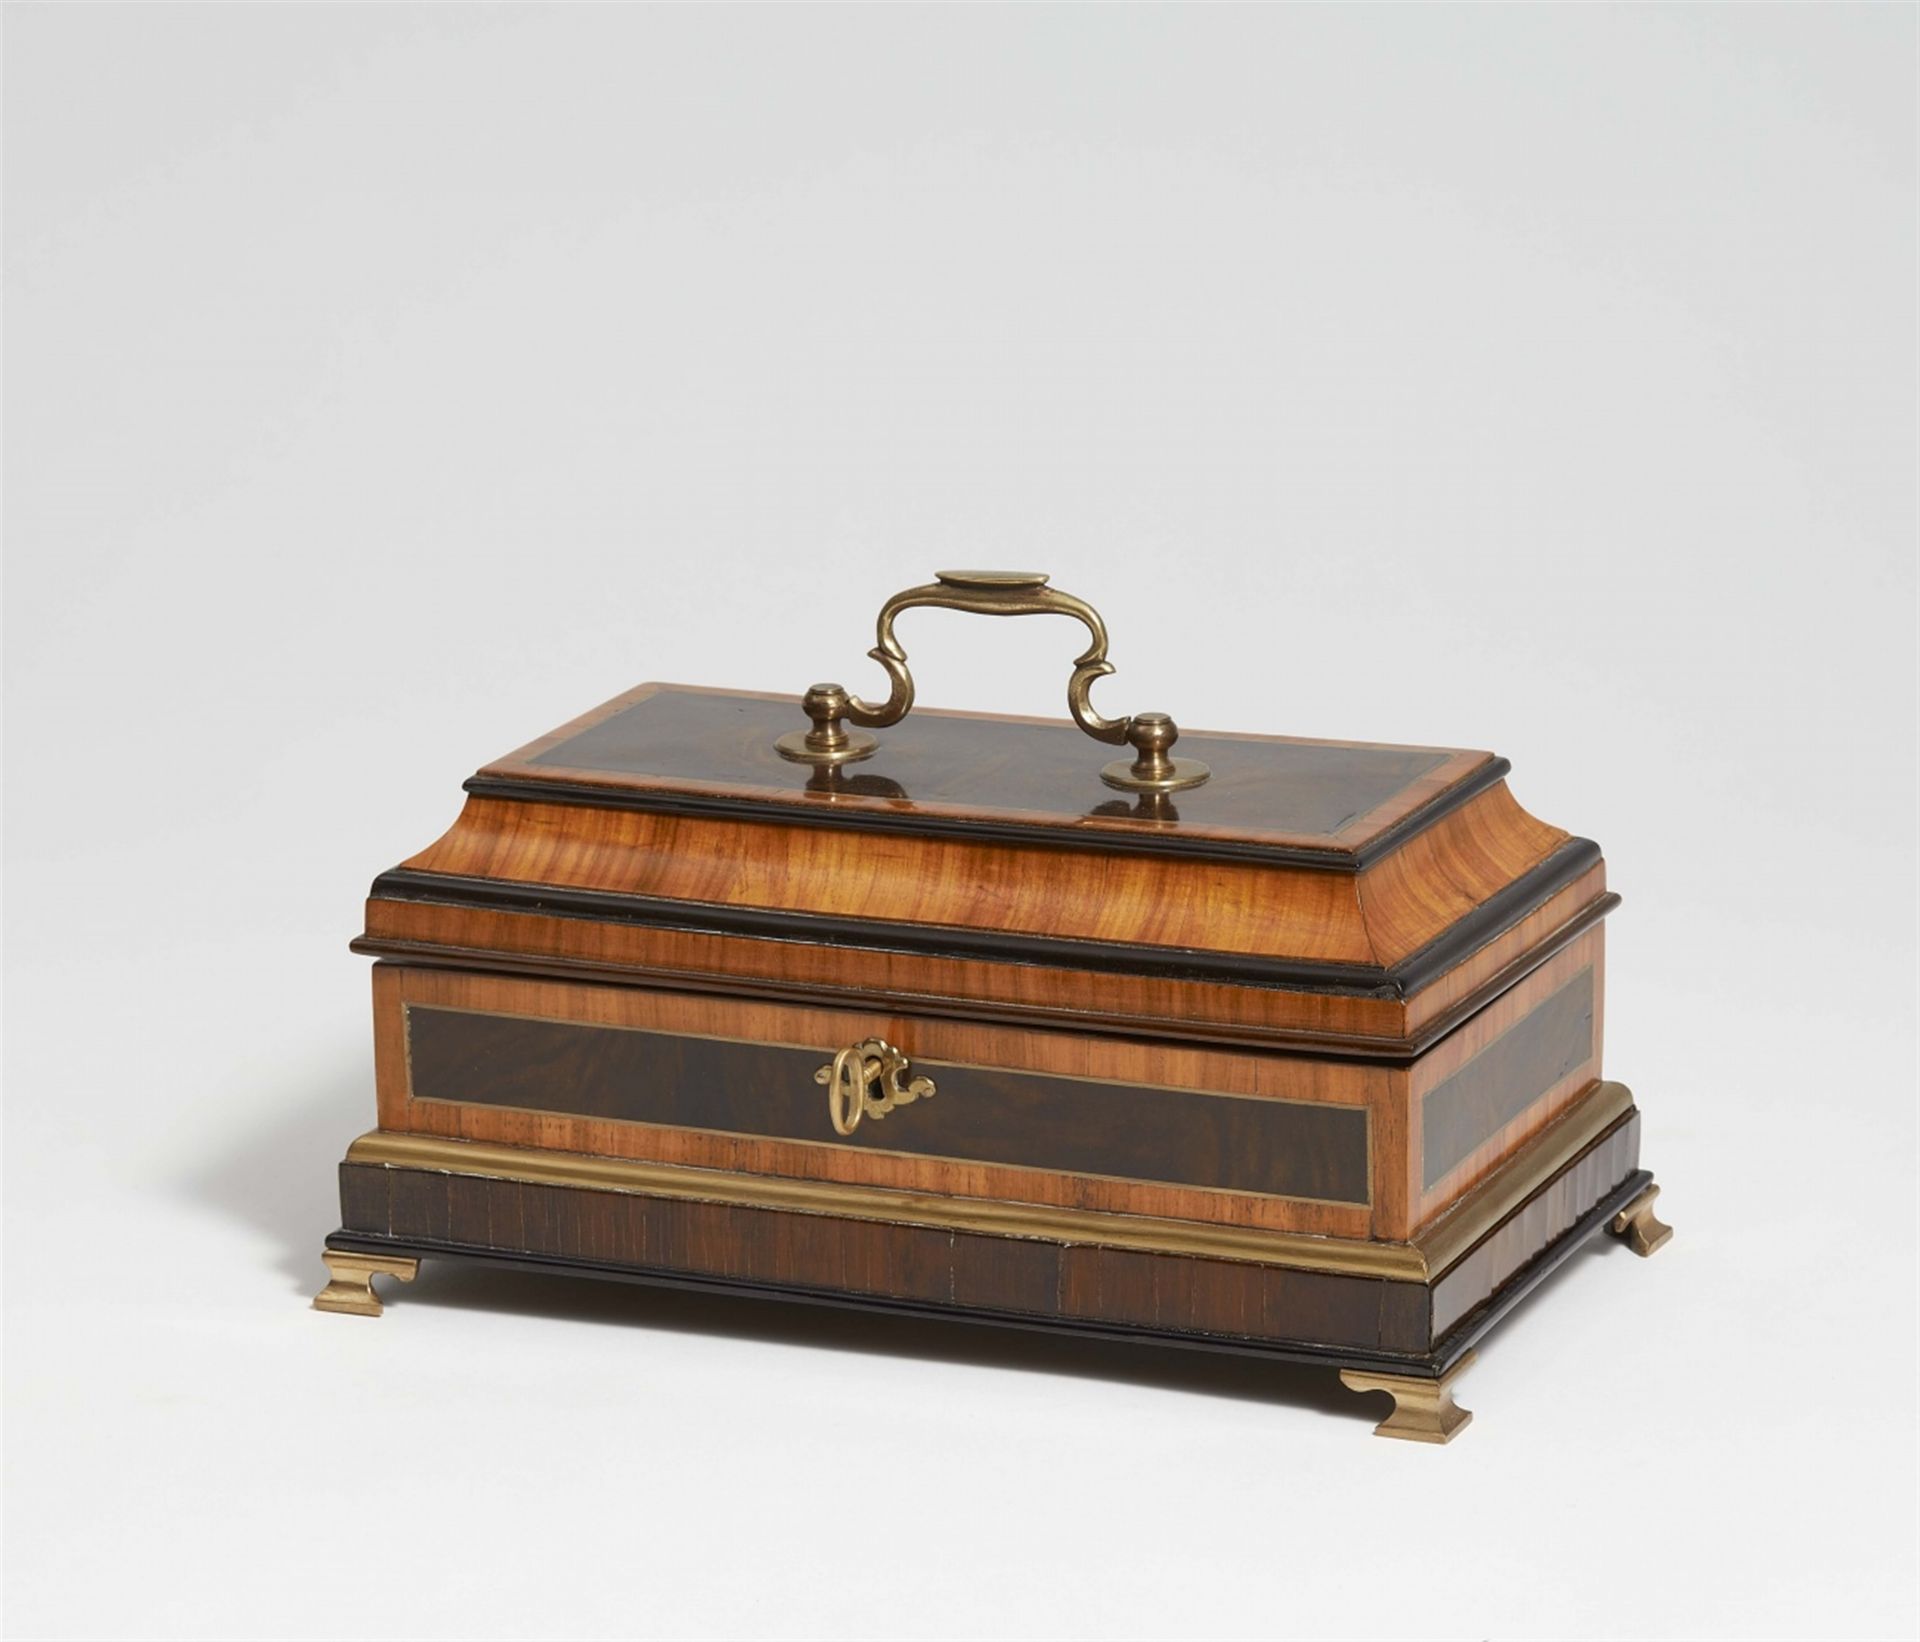 A rosewood box by the workshop of Abraham Roentgen